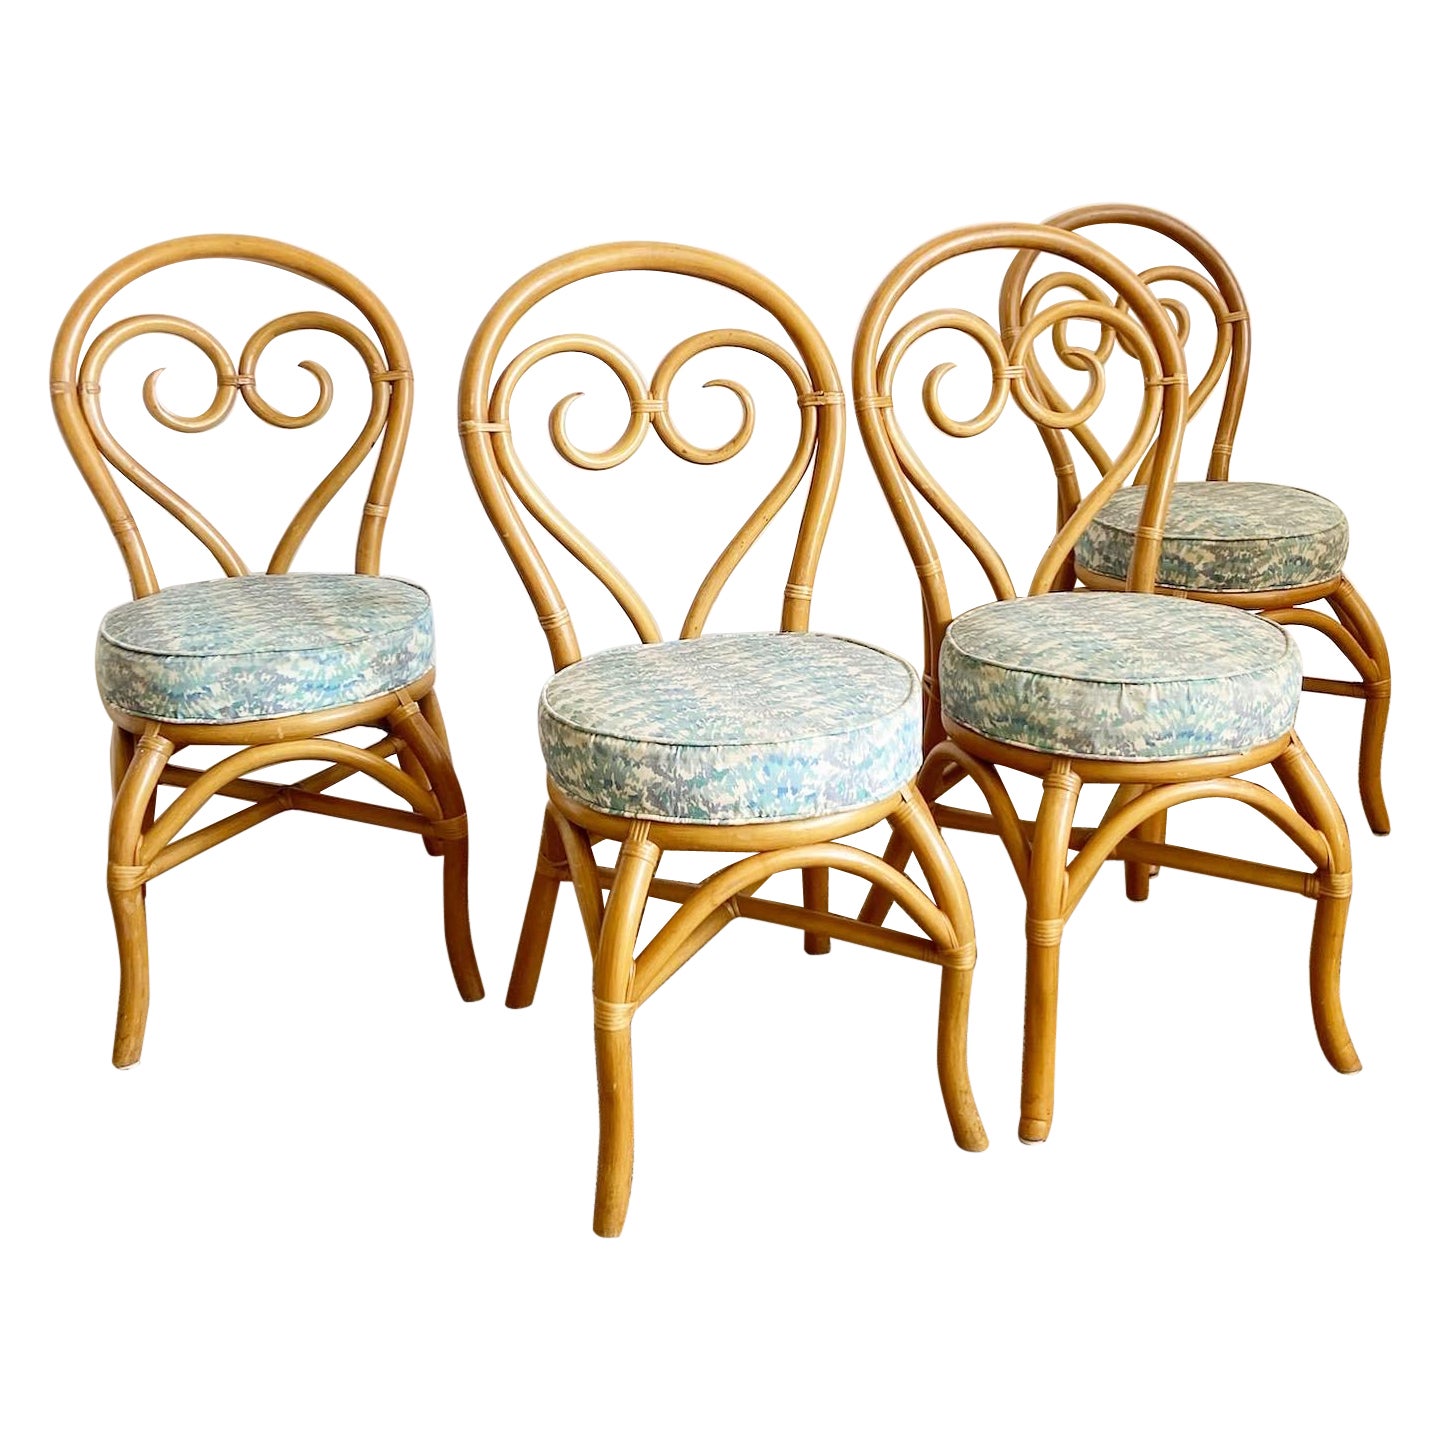 Boho Chic Bent Bamboo Rattan Heart Back Dining Chairs - Set of 4 For Sale